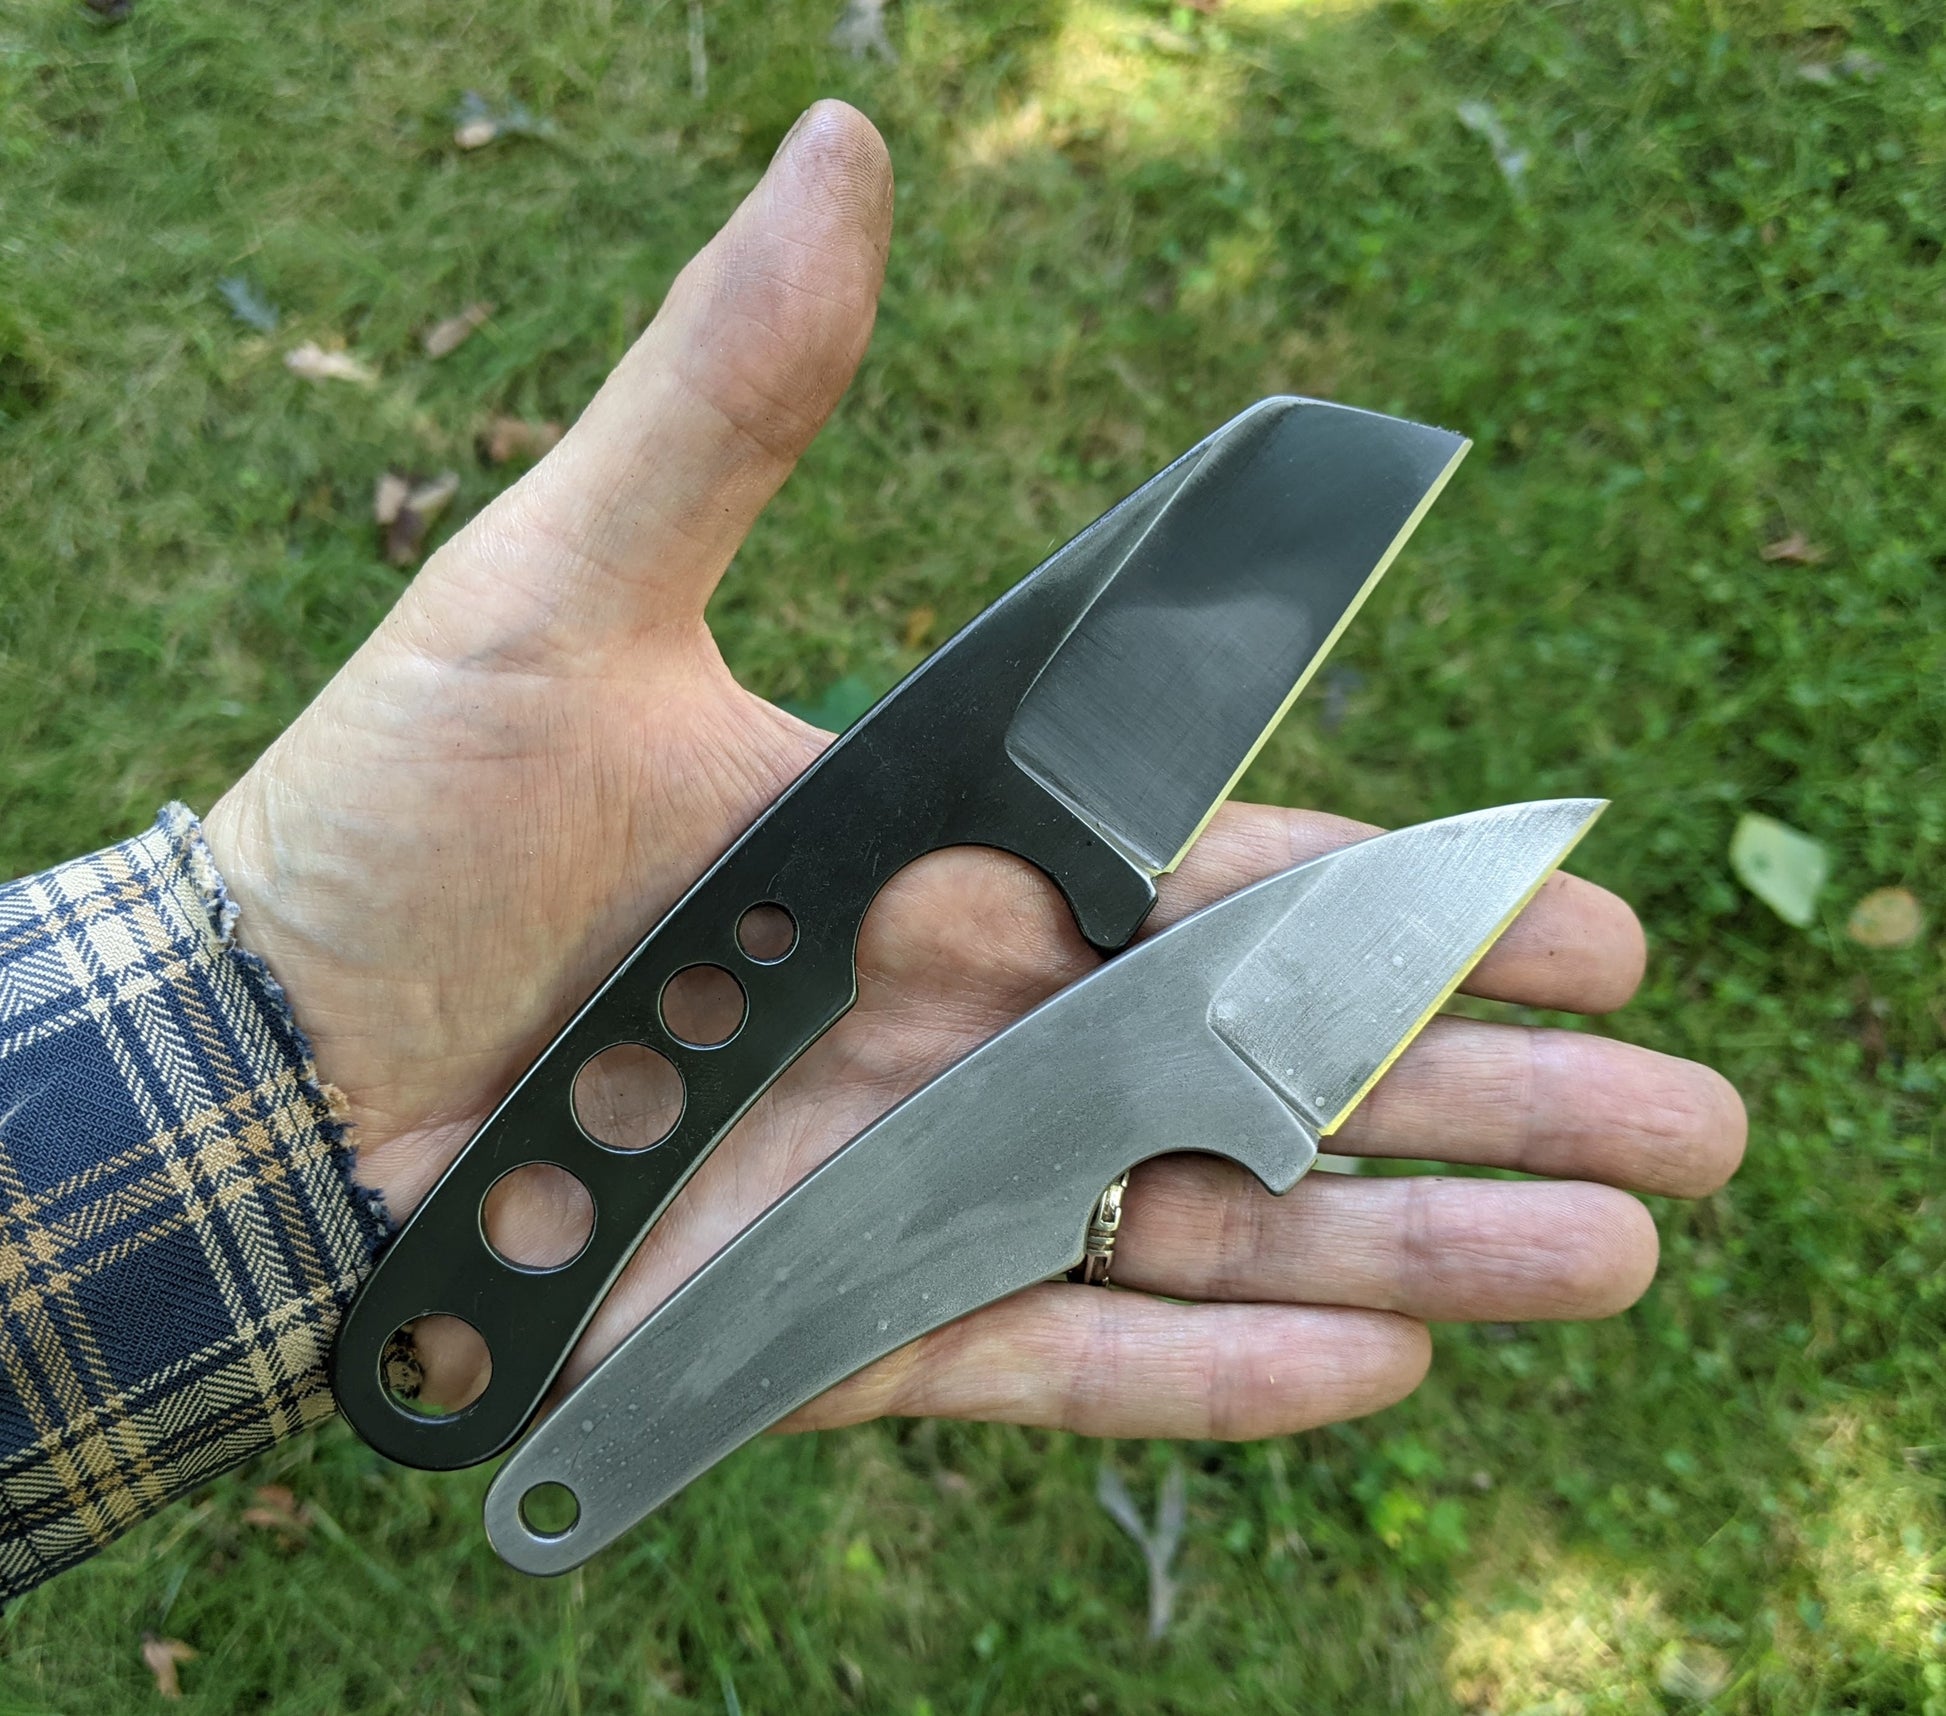 two small knives with single beveled blades